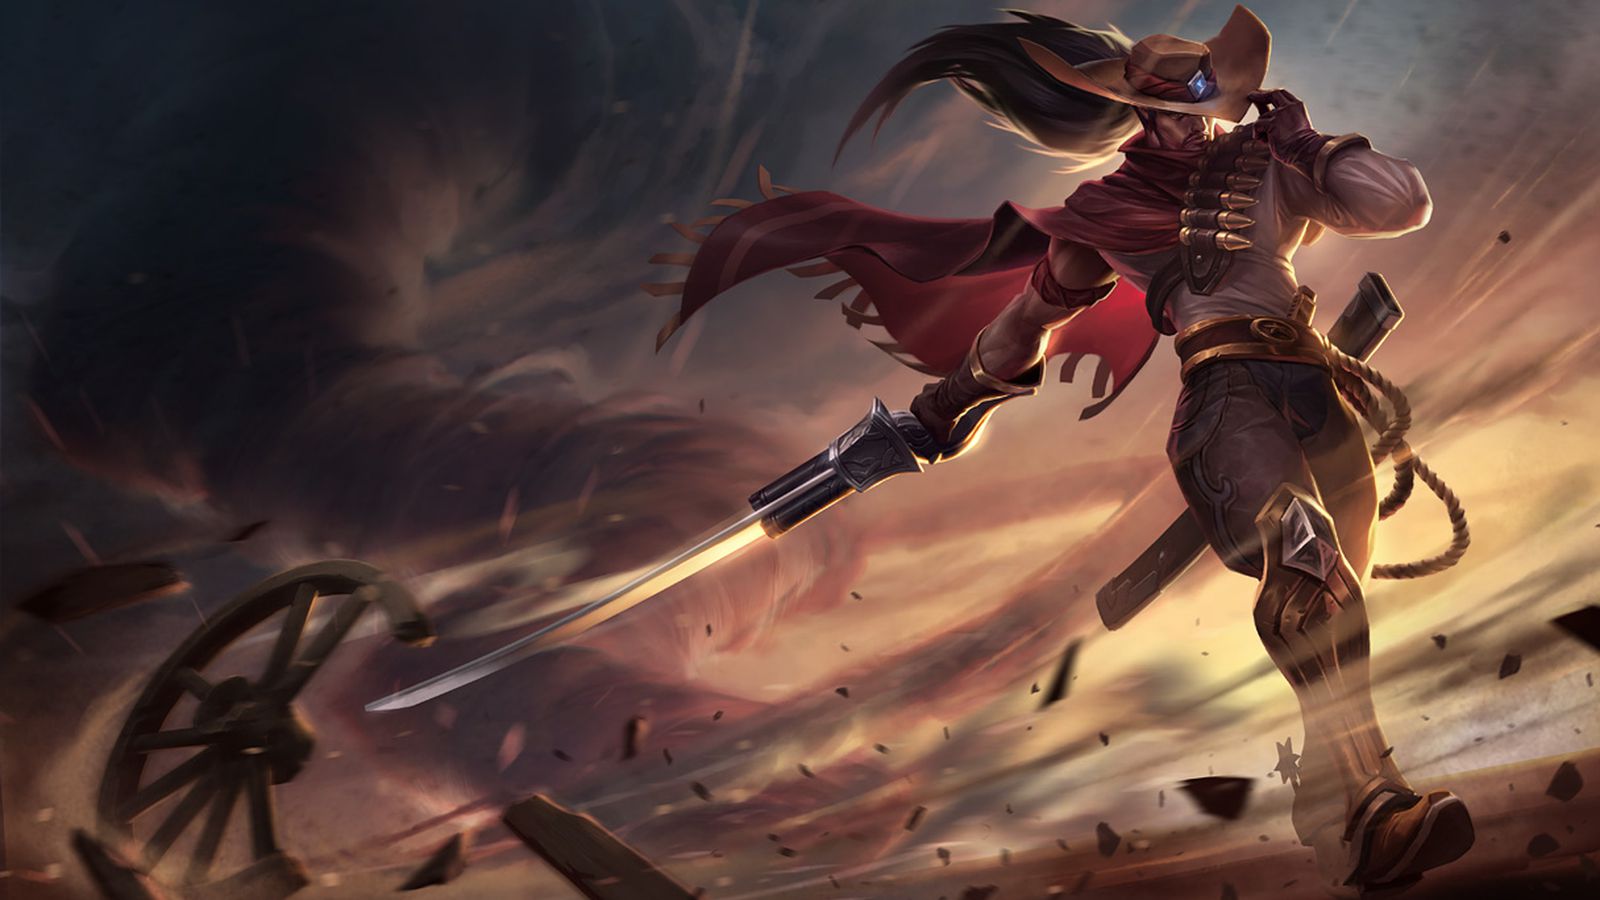 Stifte bekendtskab kunstner Frontier Thank Bard, the Yasuo nerfs are finally here - The Rift Herald